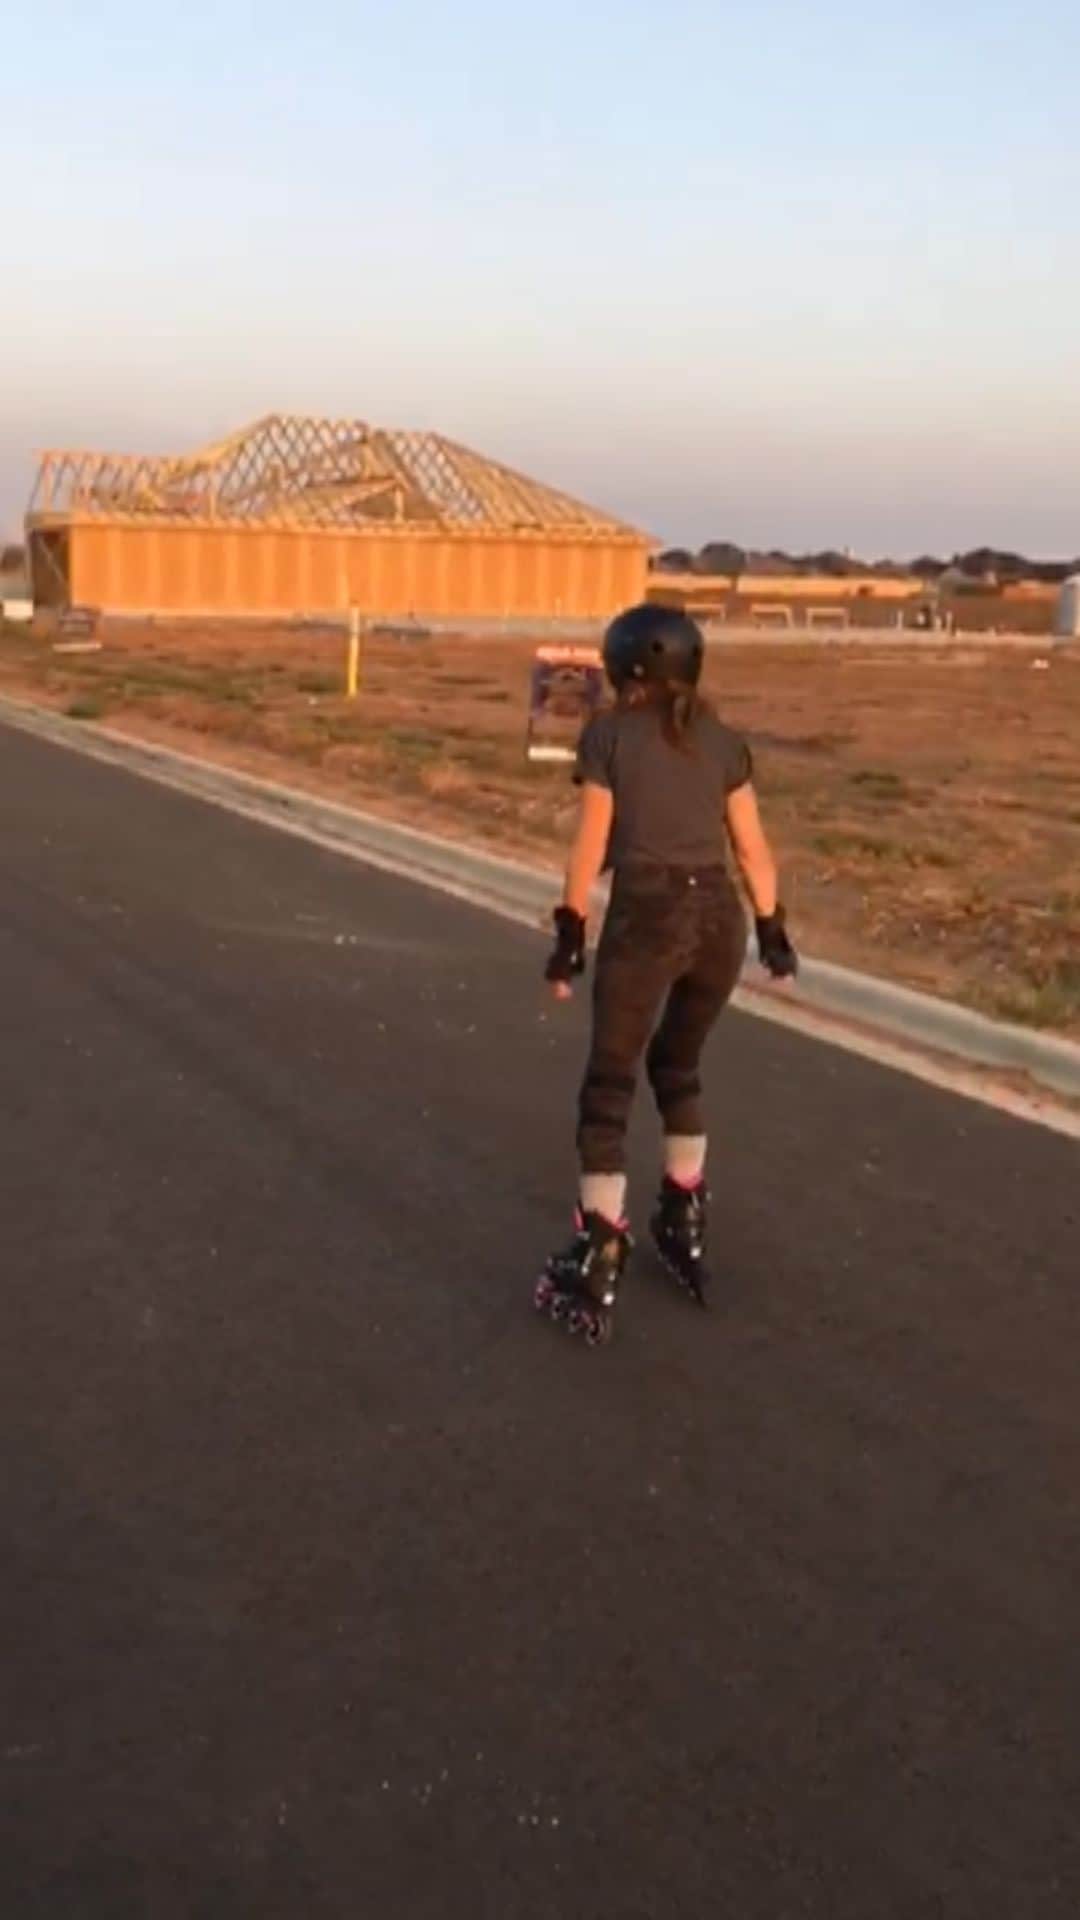 Ava Fioreのインスタグラム：「Watch out old lady 👵🏼 on rollerblades! That was embarrassing so I figured I’d share 😂💁🏻‍♀️」